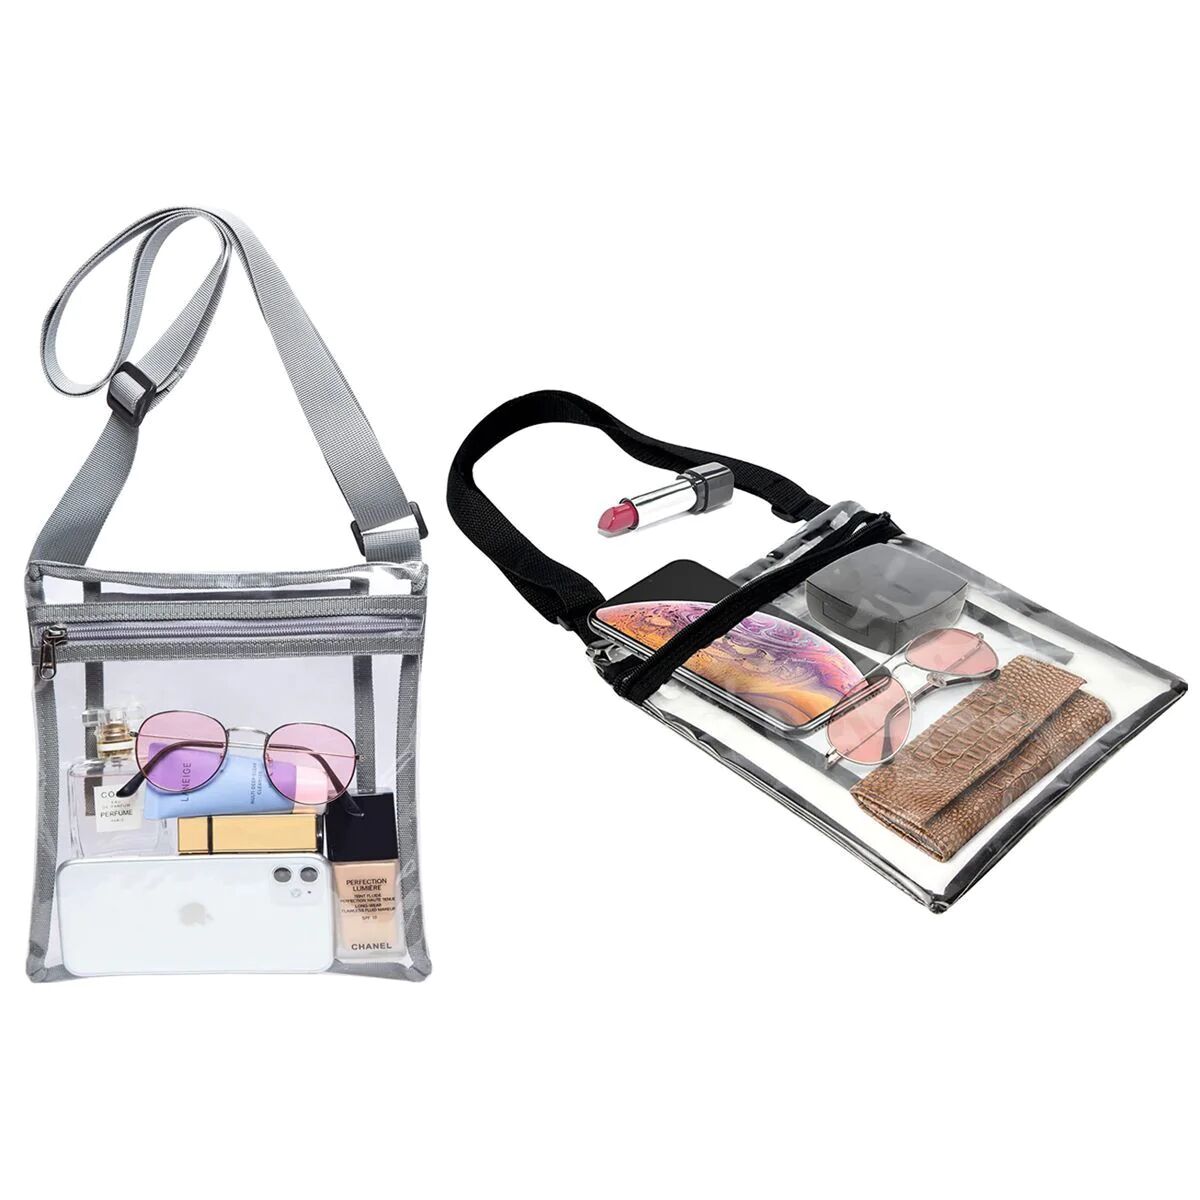 DailySale Stadium Approved Clear Crossbody Bag Purse with Adjustable Strap